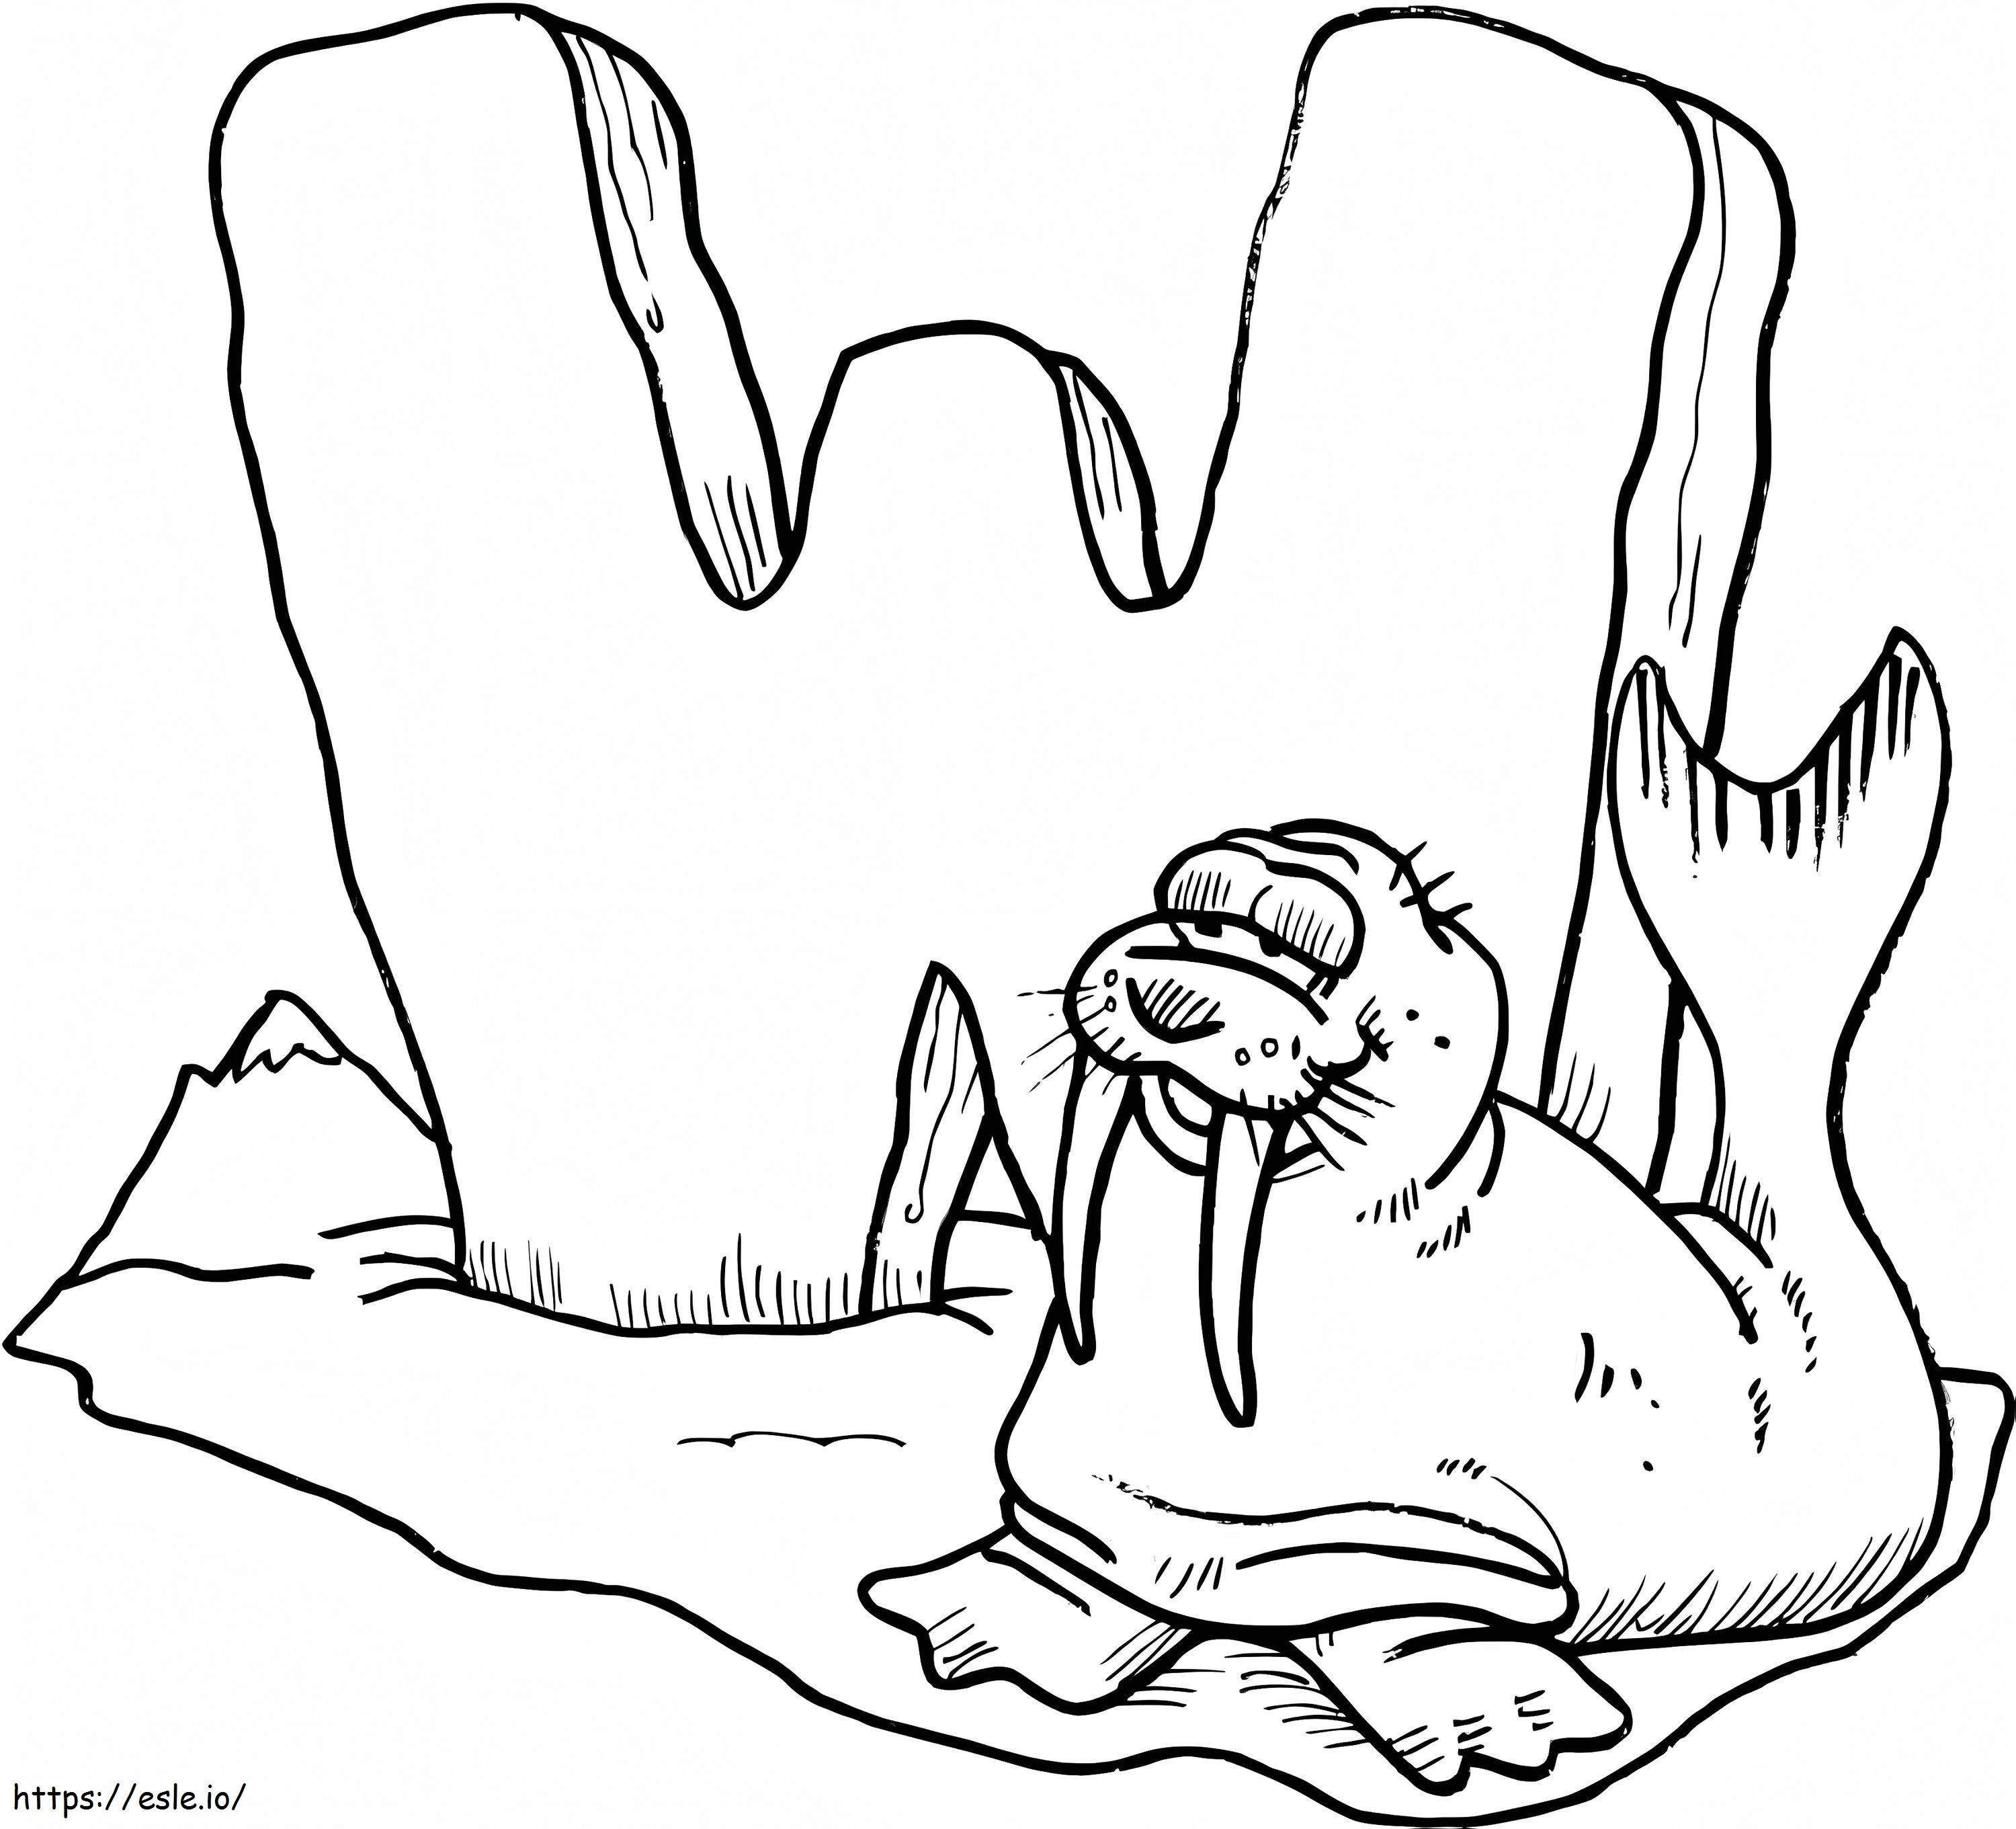 Walrus Smiling Letter W coloring page